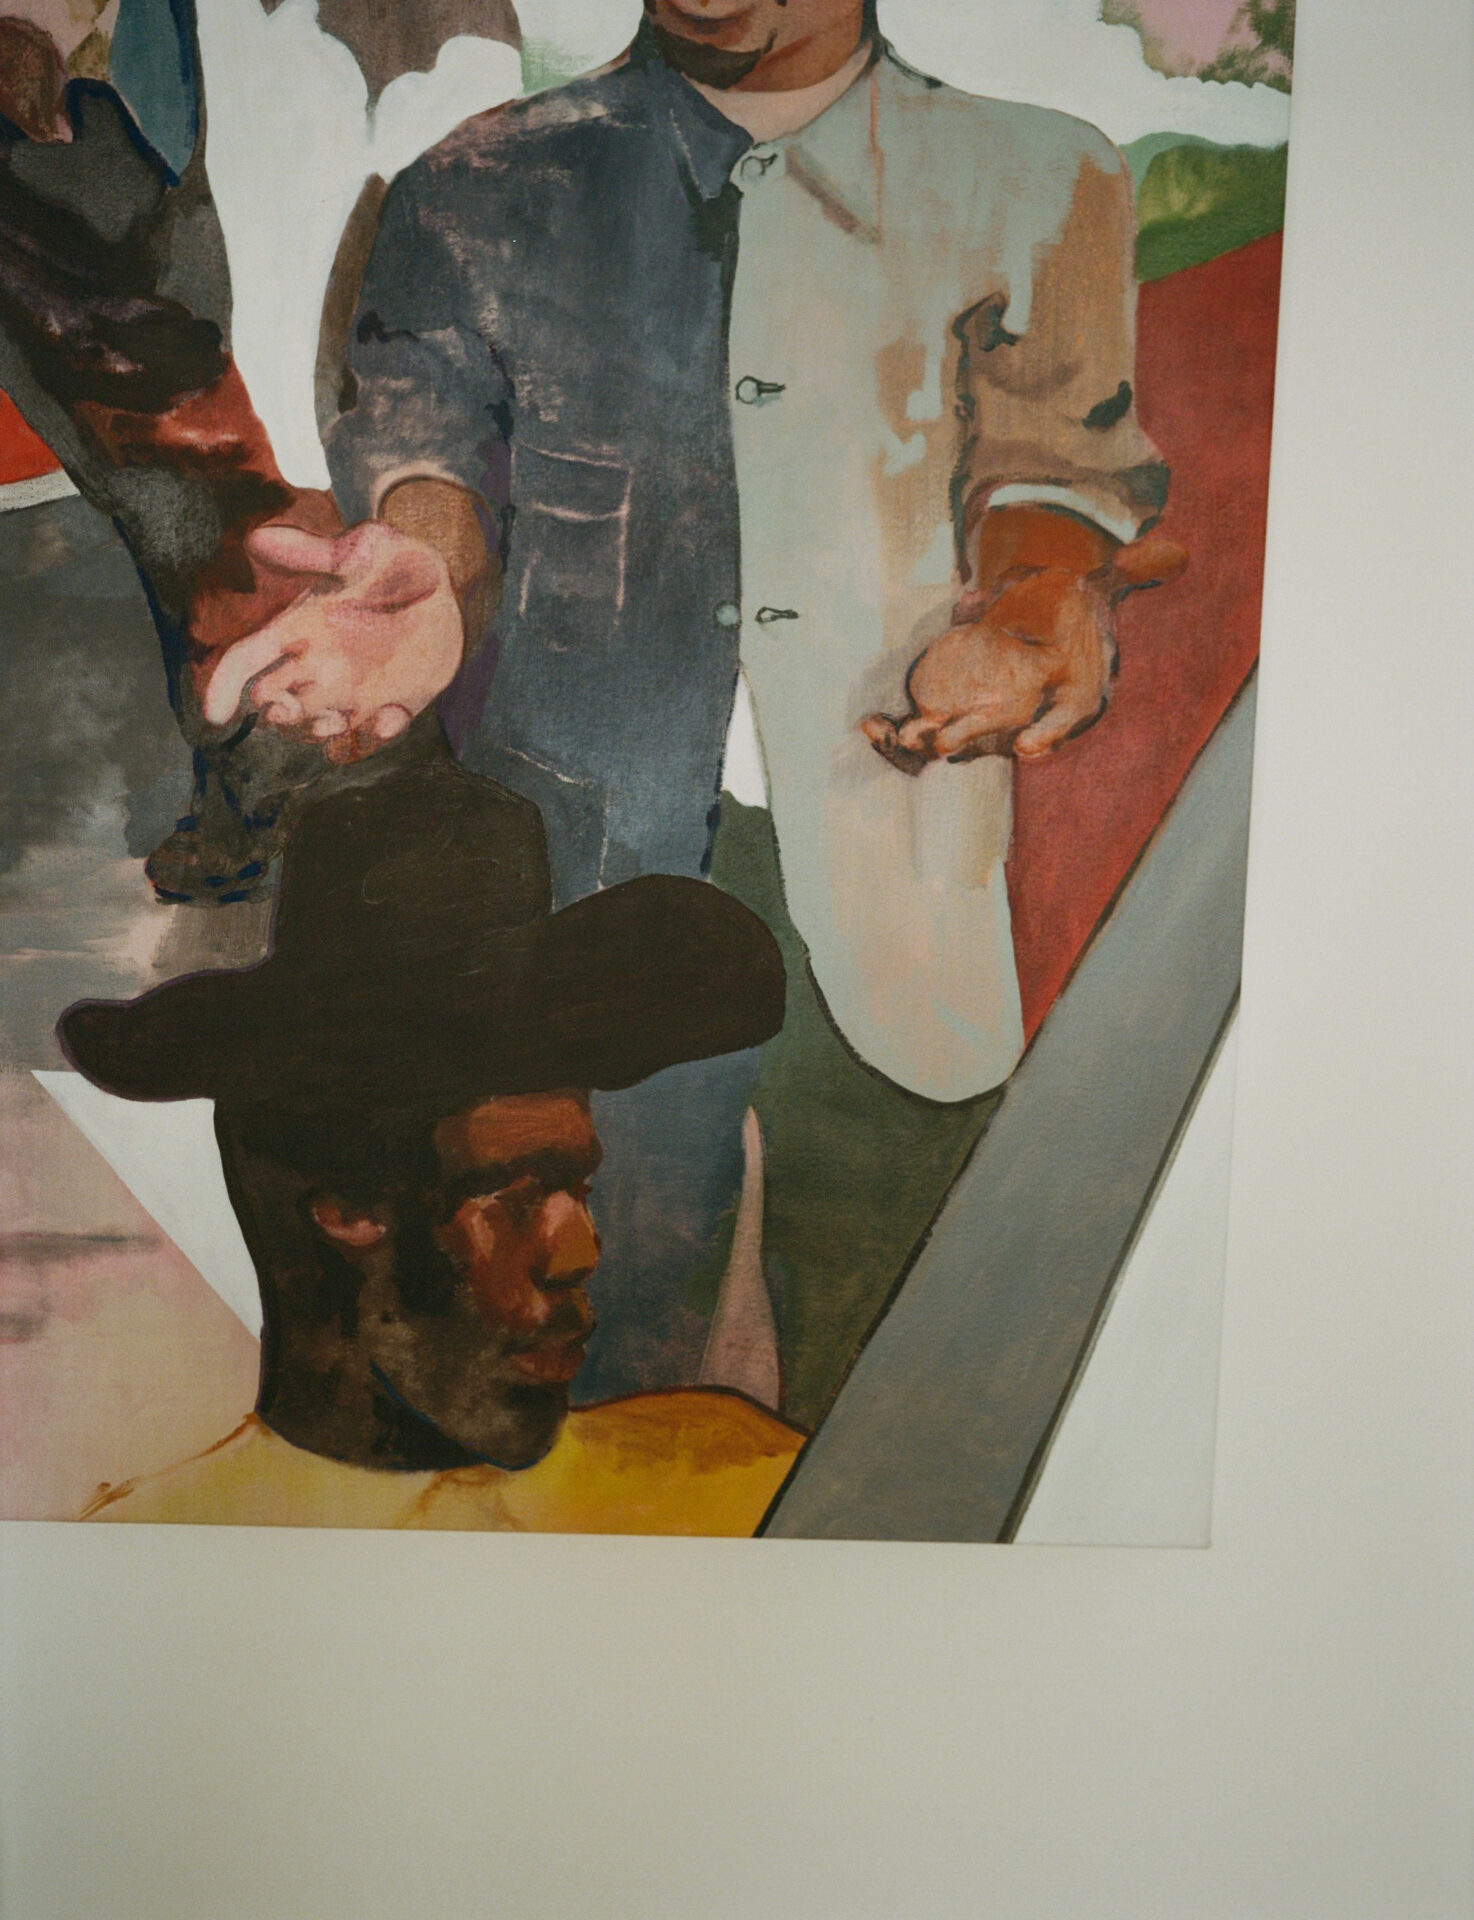 A painting of man in a crowd wearing a cowboy hat